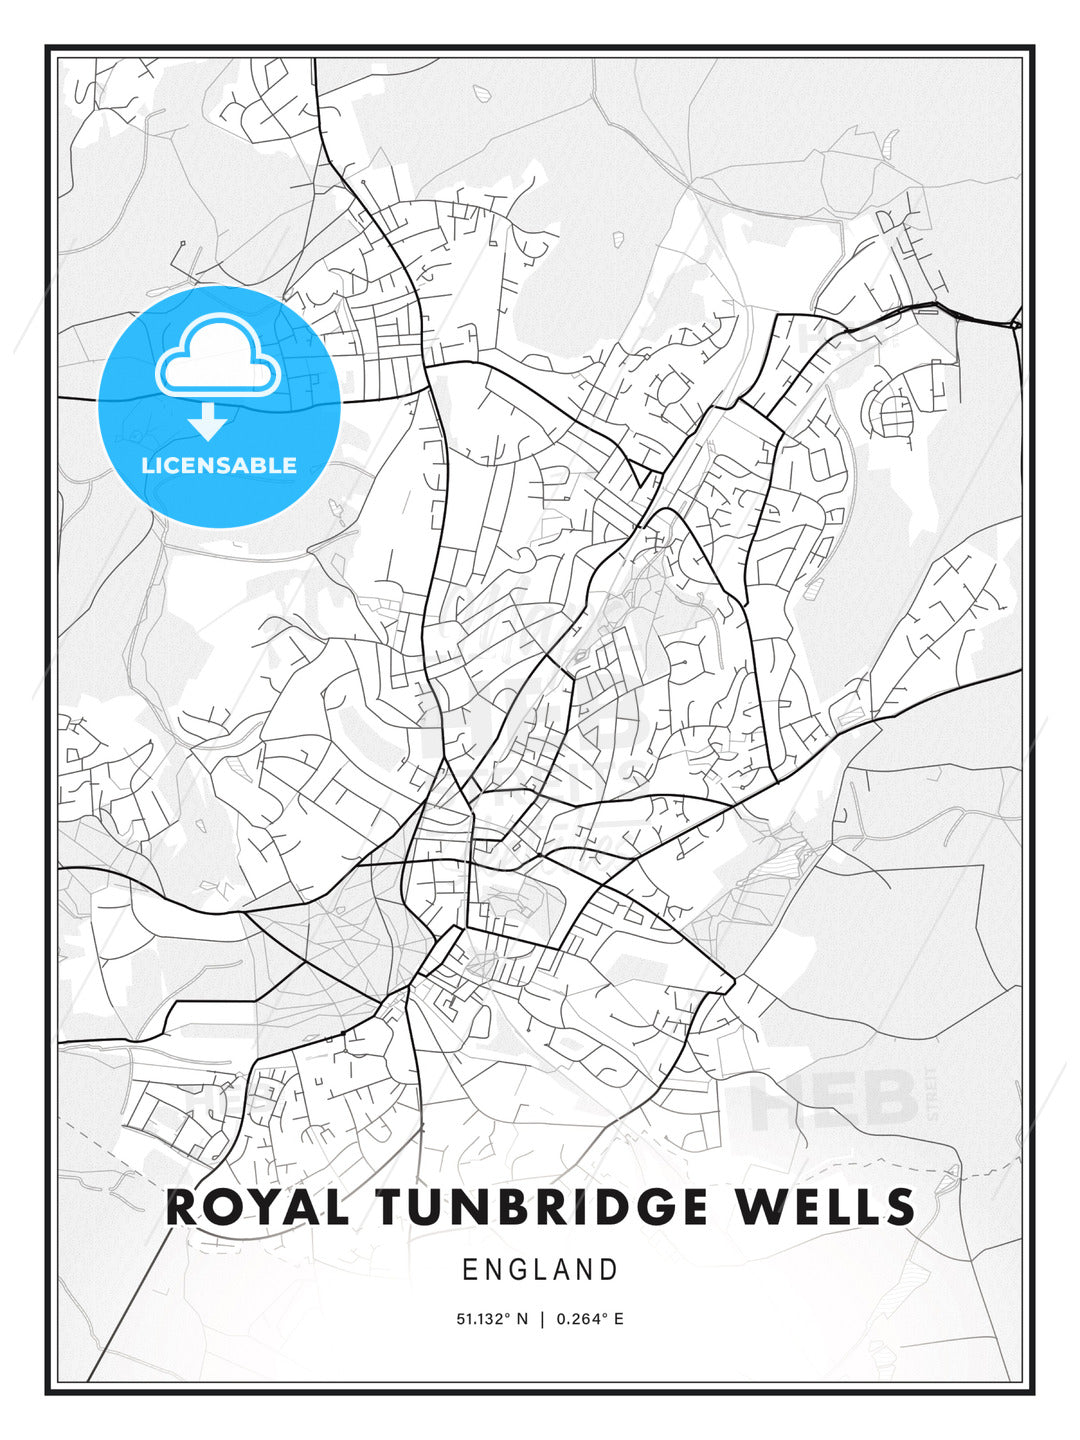 Royal Tunbridge Wells, England, Modern Print Template in Various Formats - HEBSTREITS Sketches